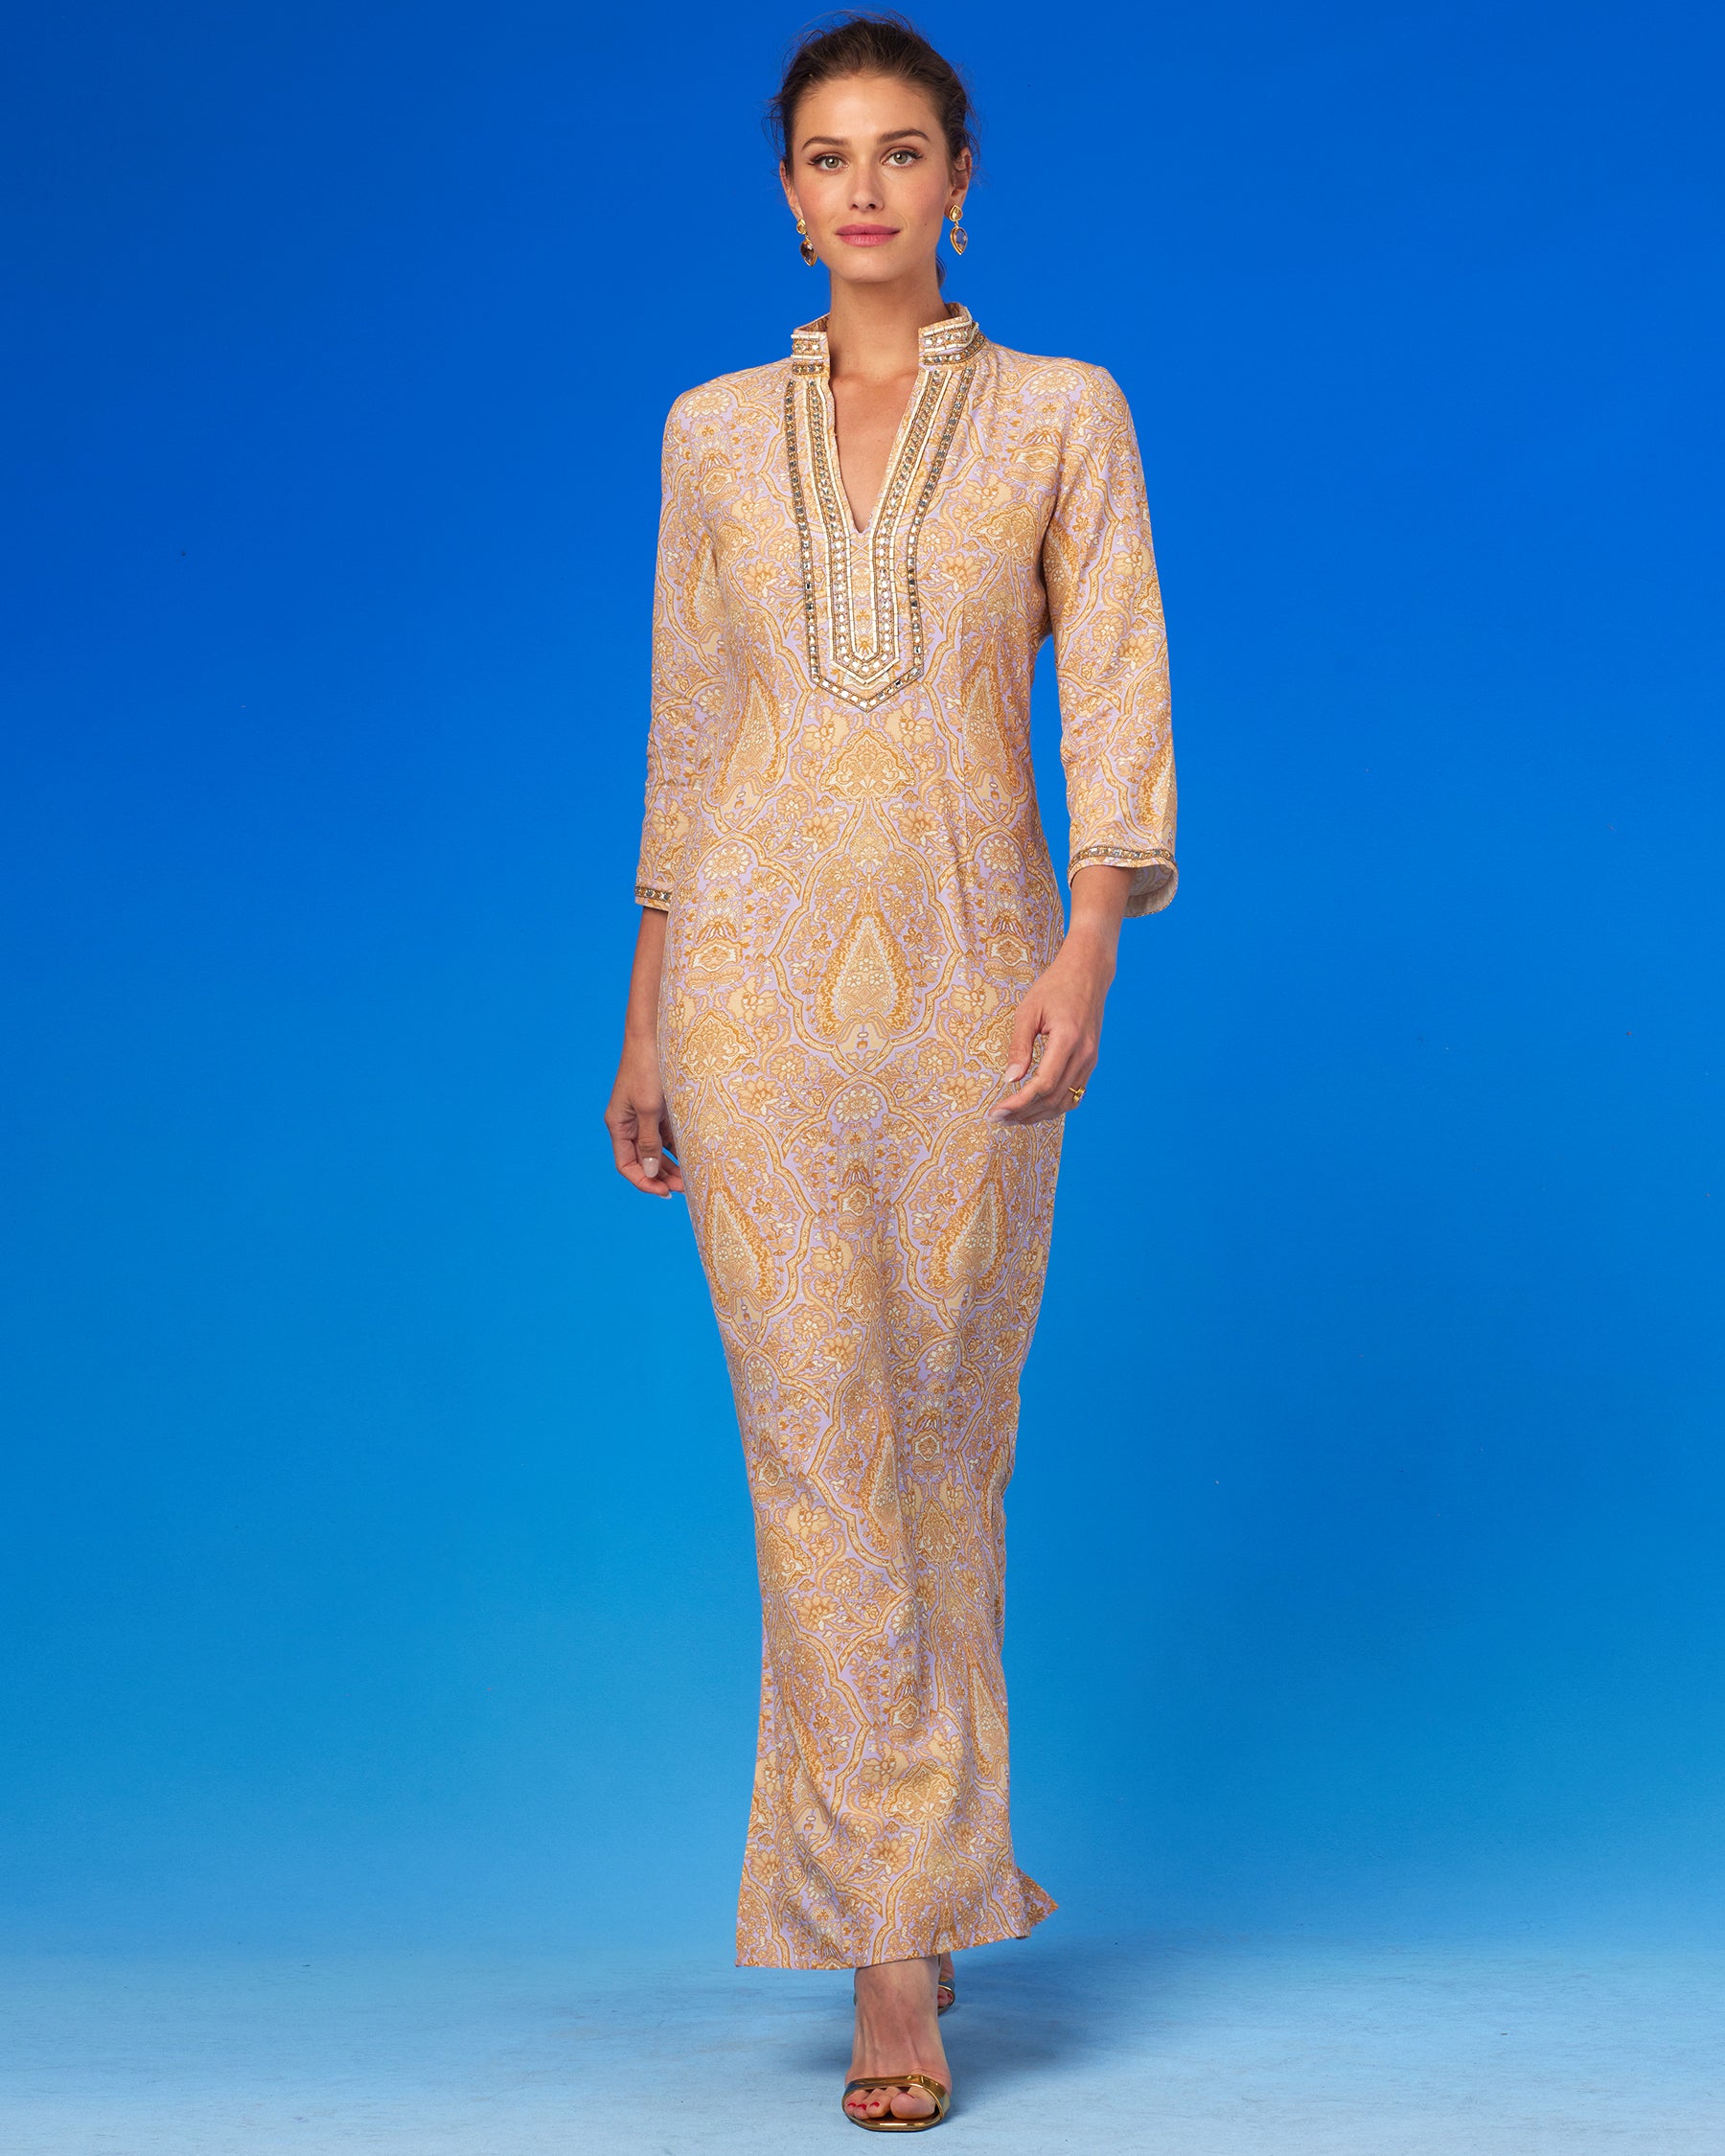 Laetitia Long Dress in Saffron on Lavender with Jewel Embellishment-Front View Walking